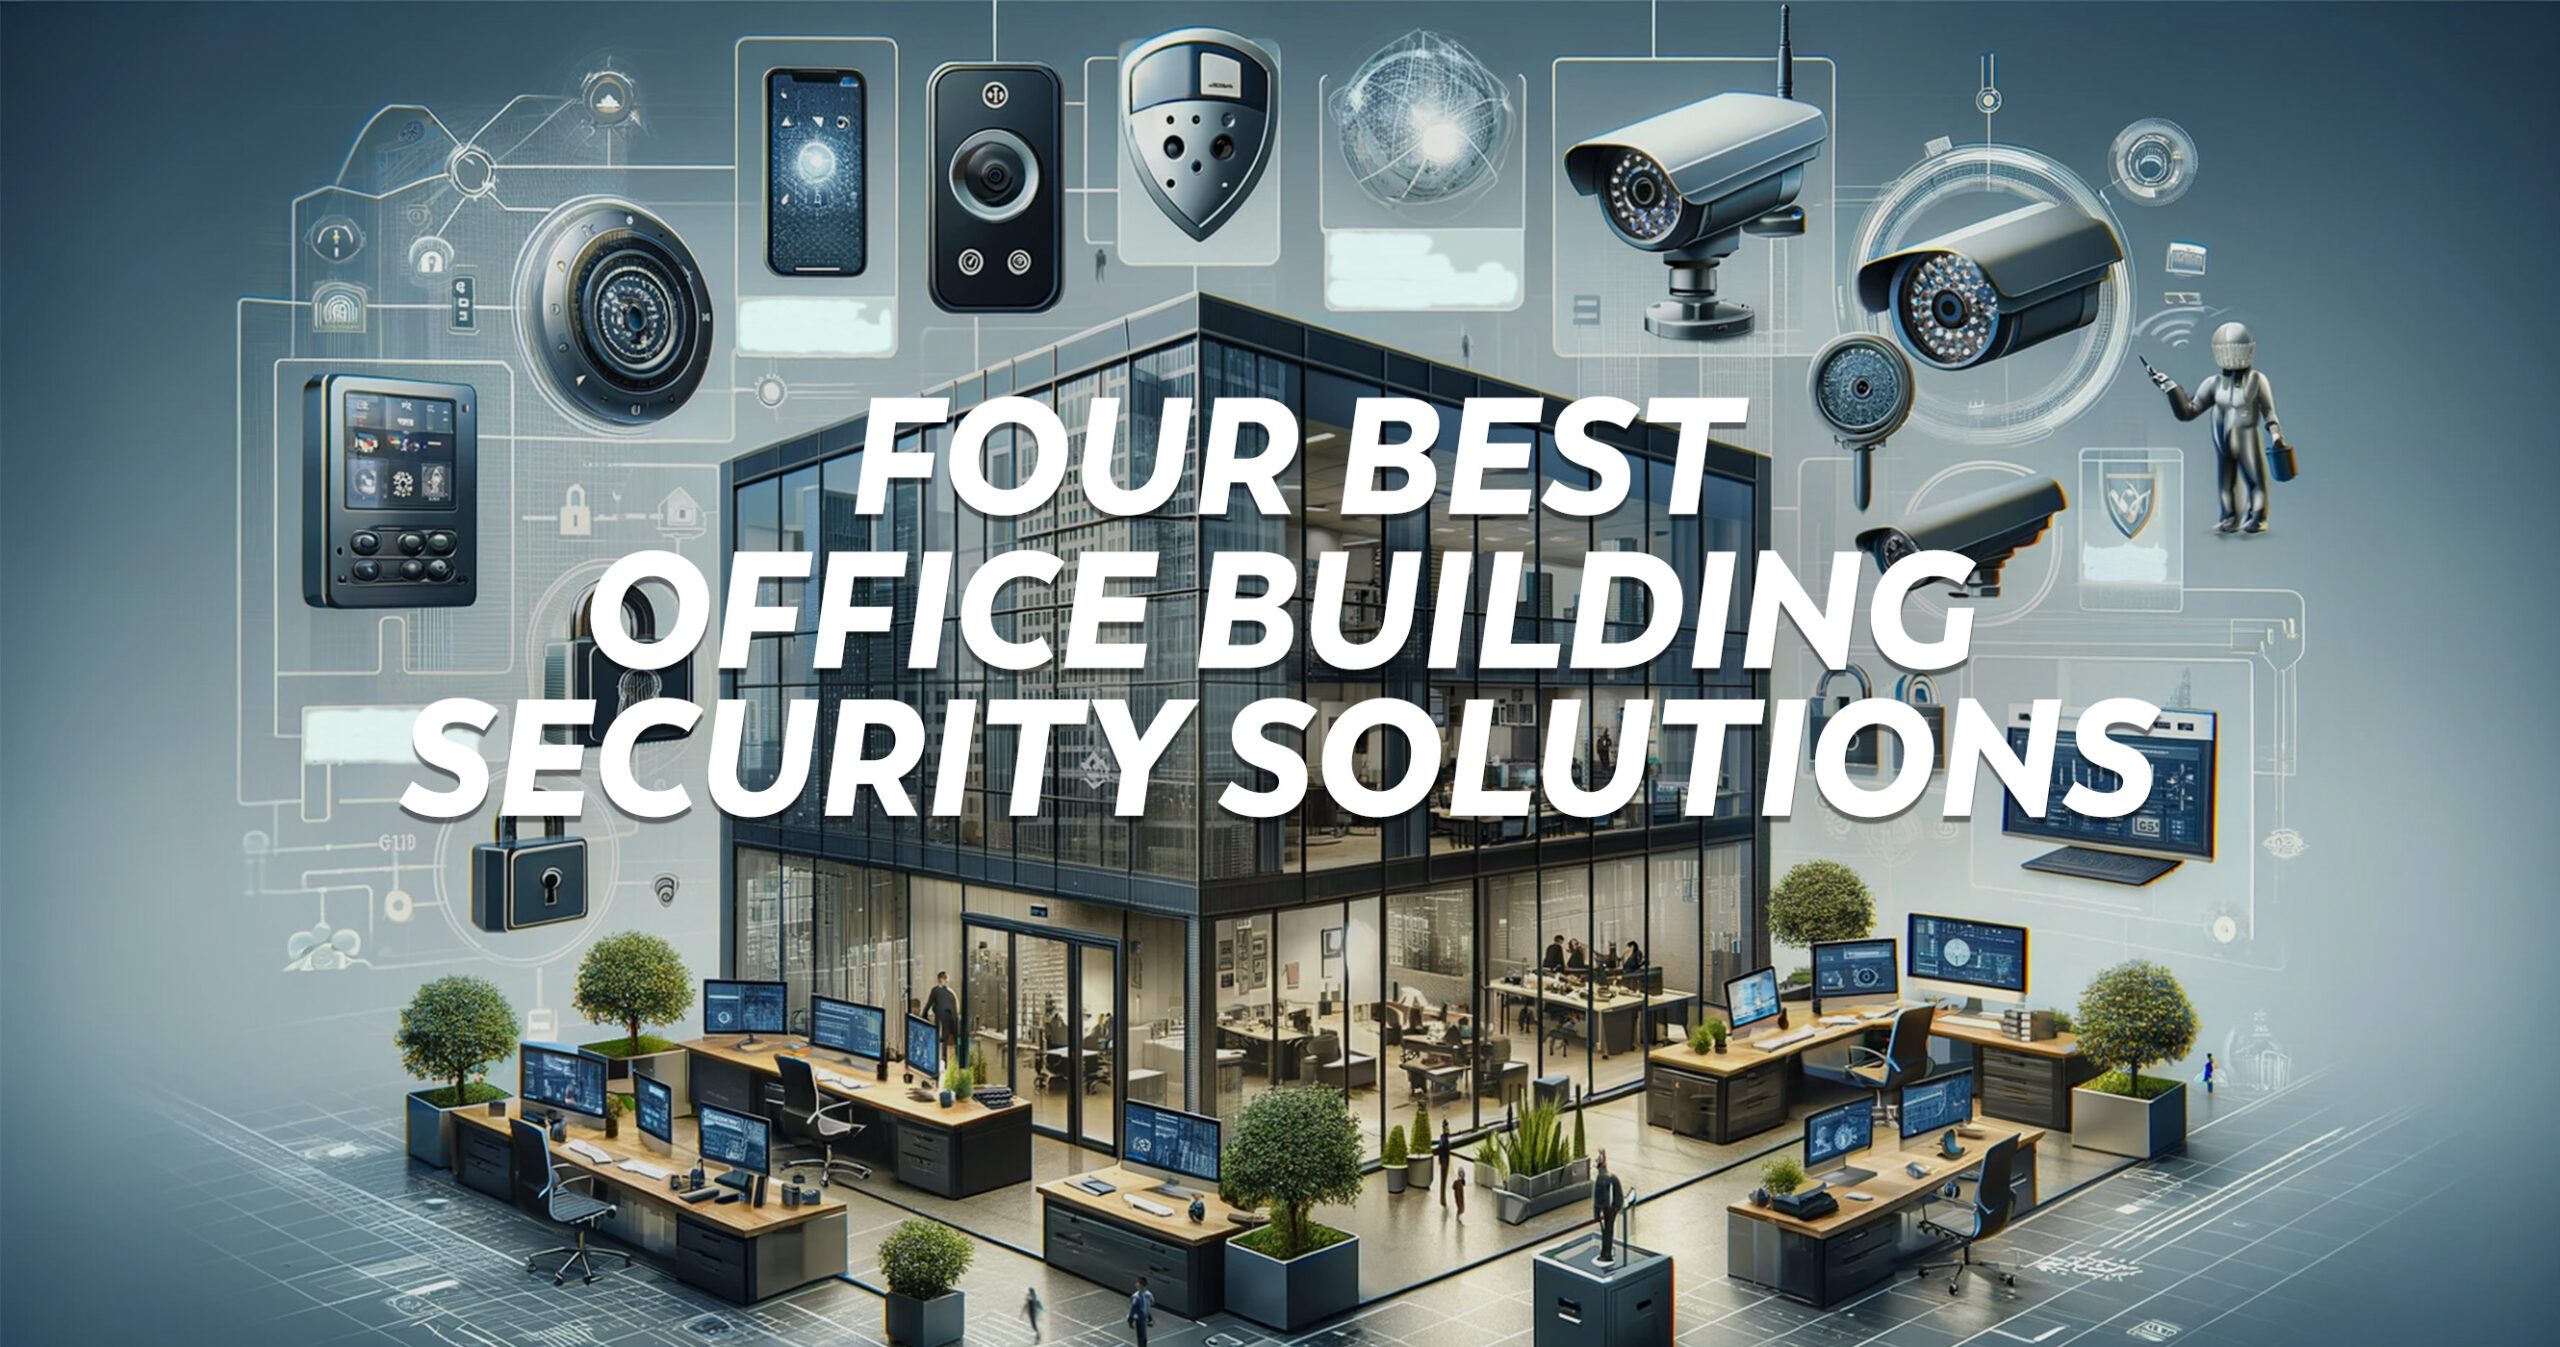 Featured image for “Four Best Office Building Security Solutions”